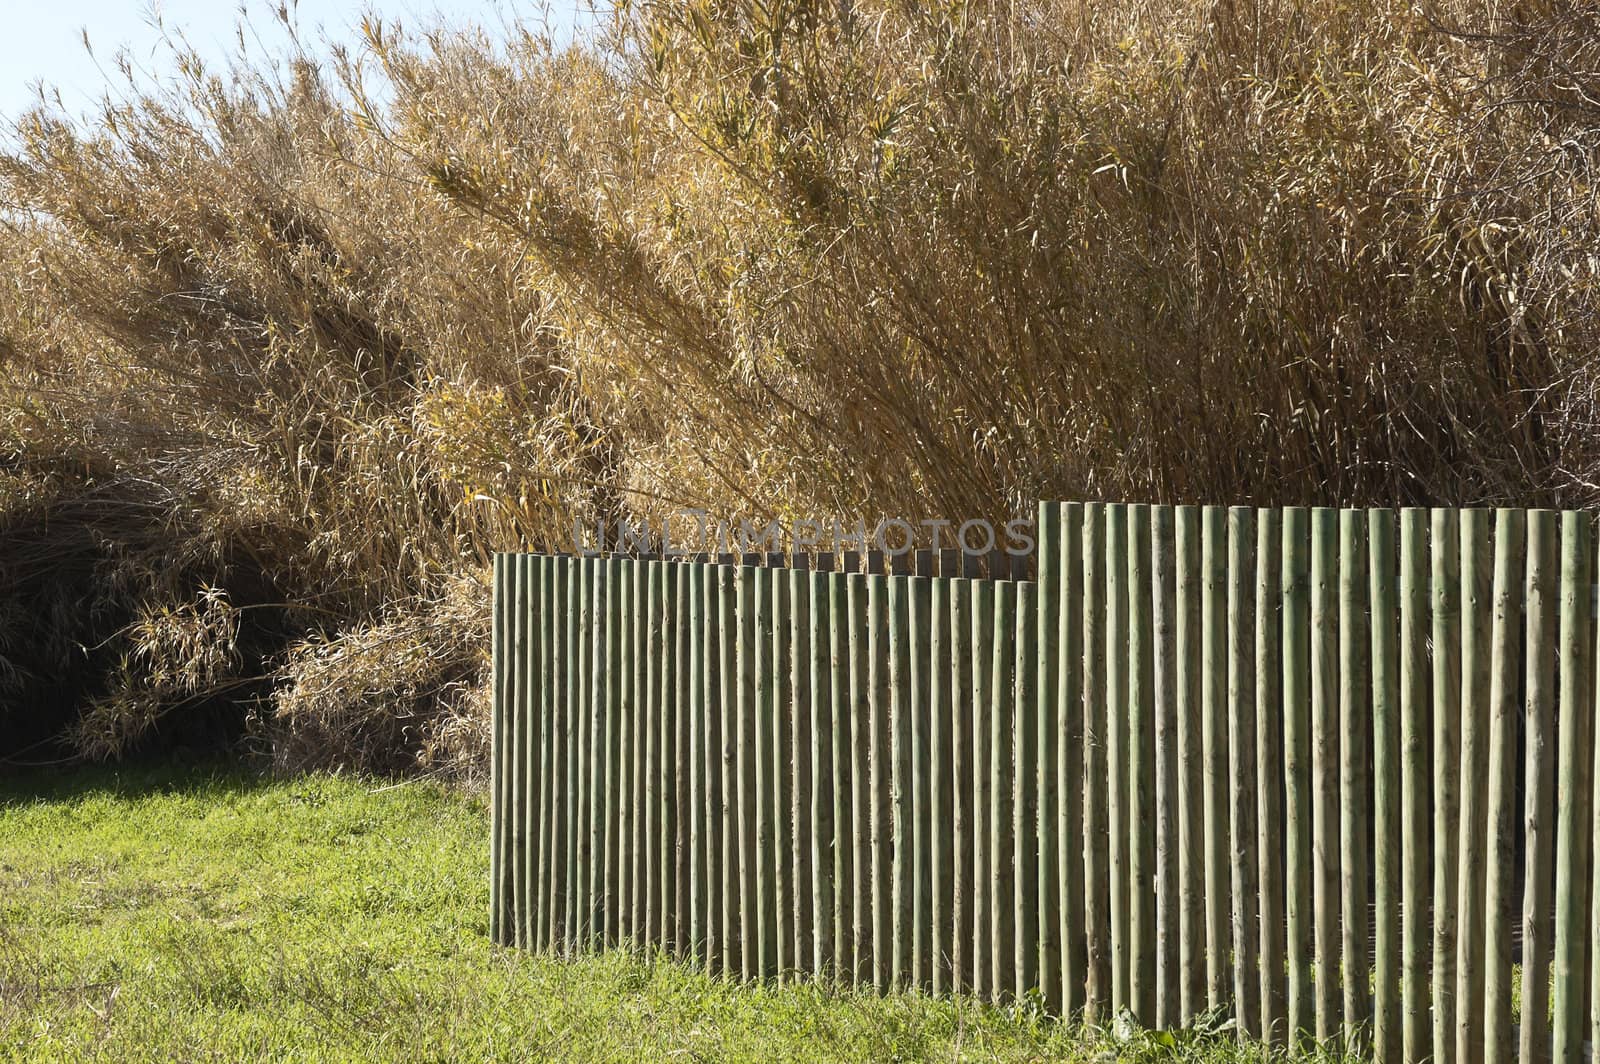 Wooden fence in a field of grass near a canebrake